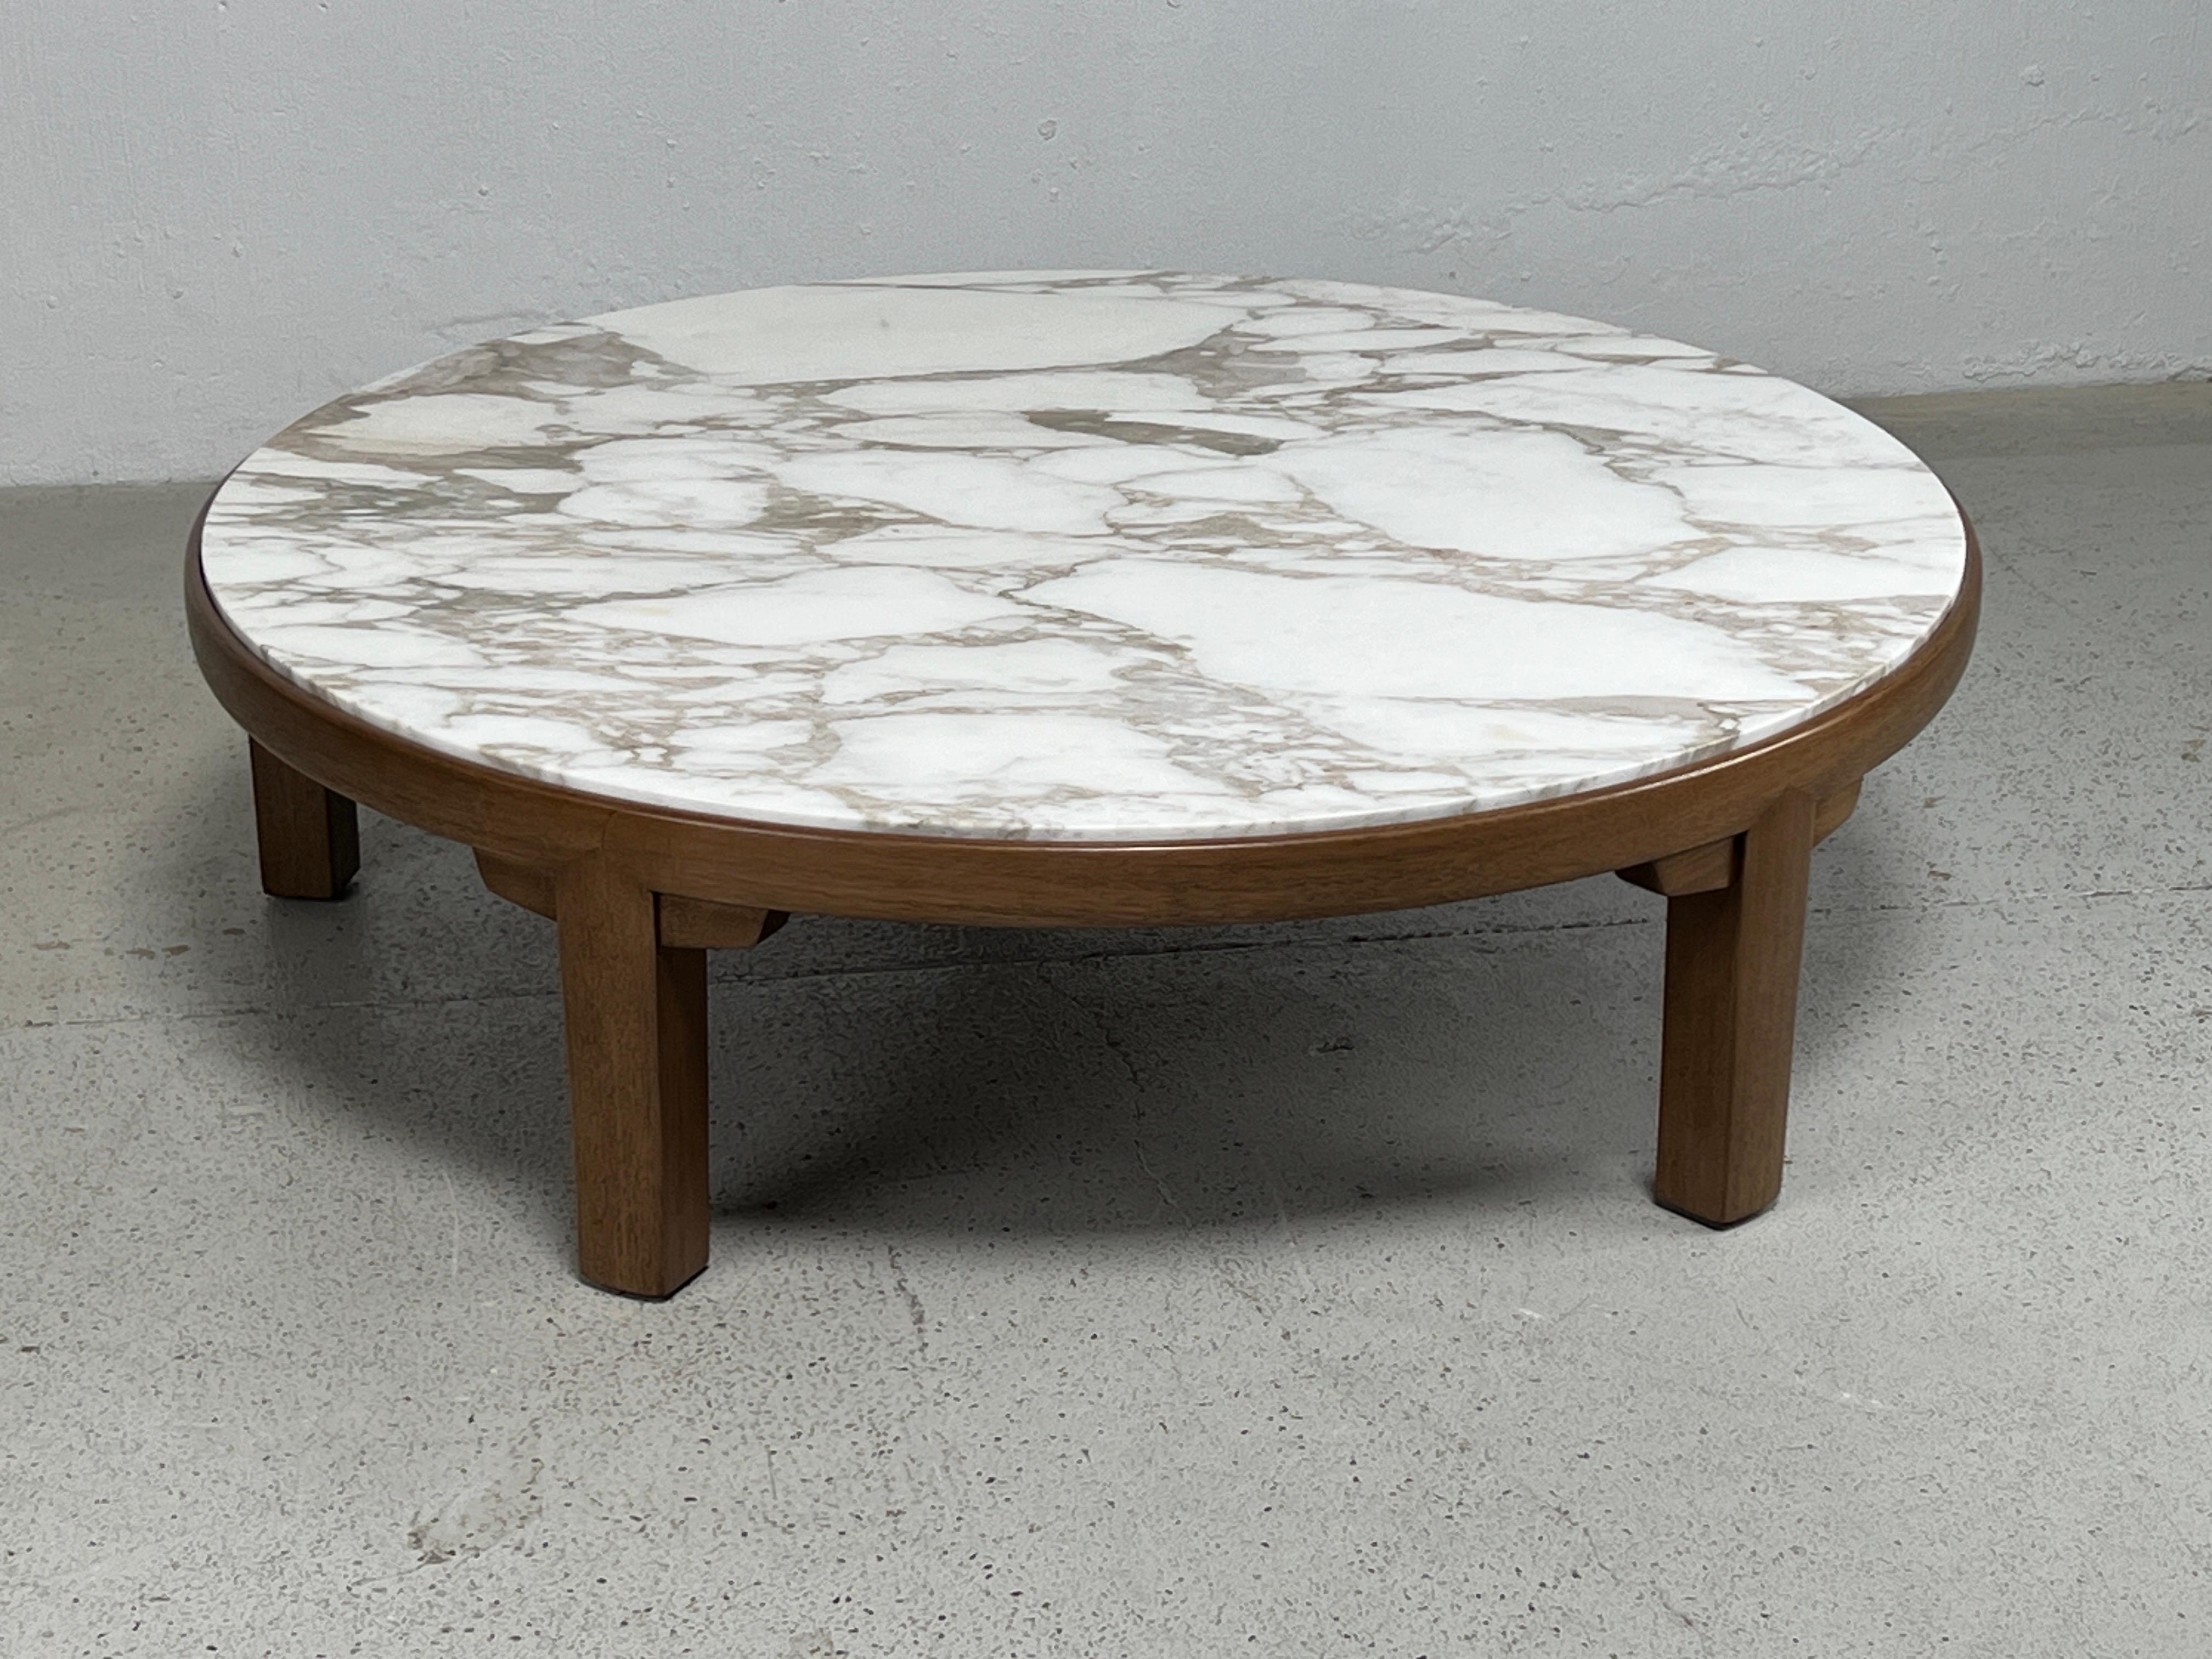 A mahogany coffee table with figurative marble top. Designed by Edward Wormley for Dunbar.